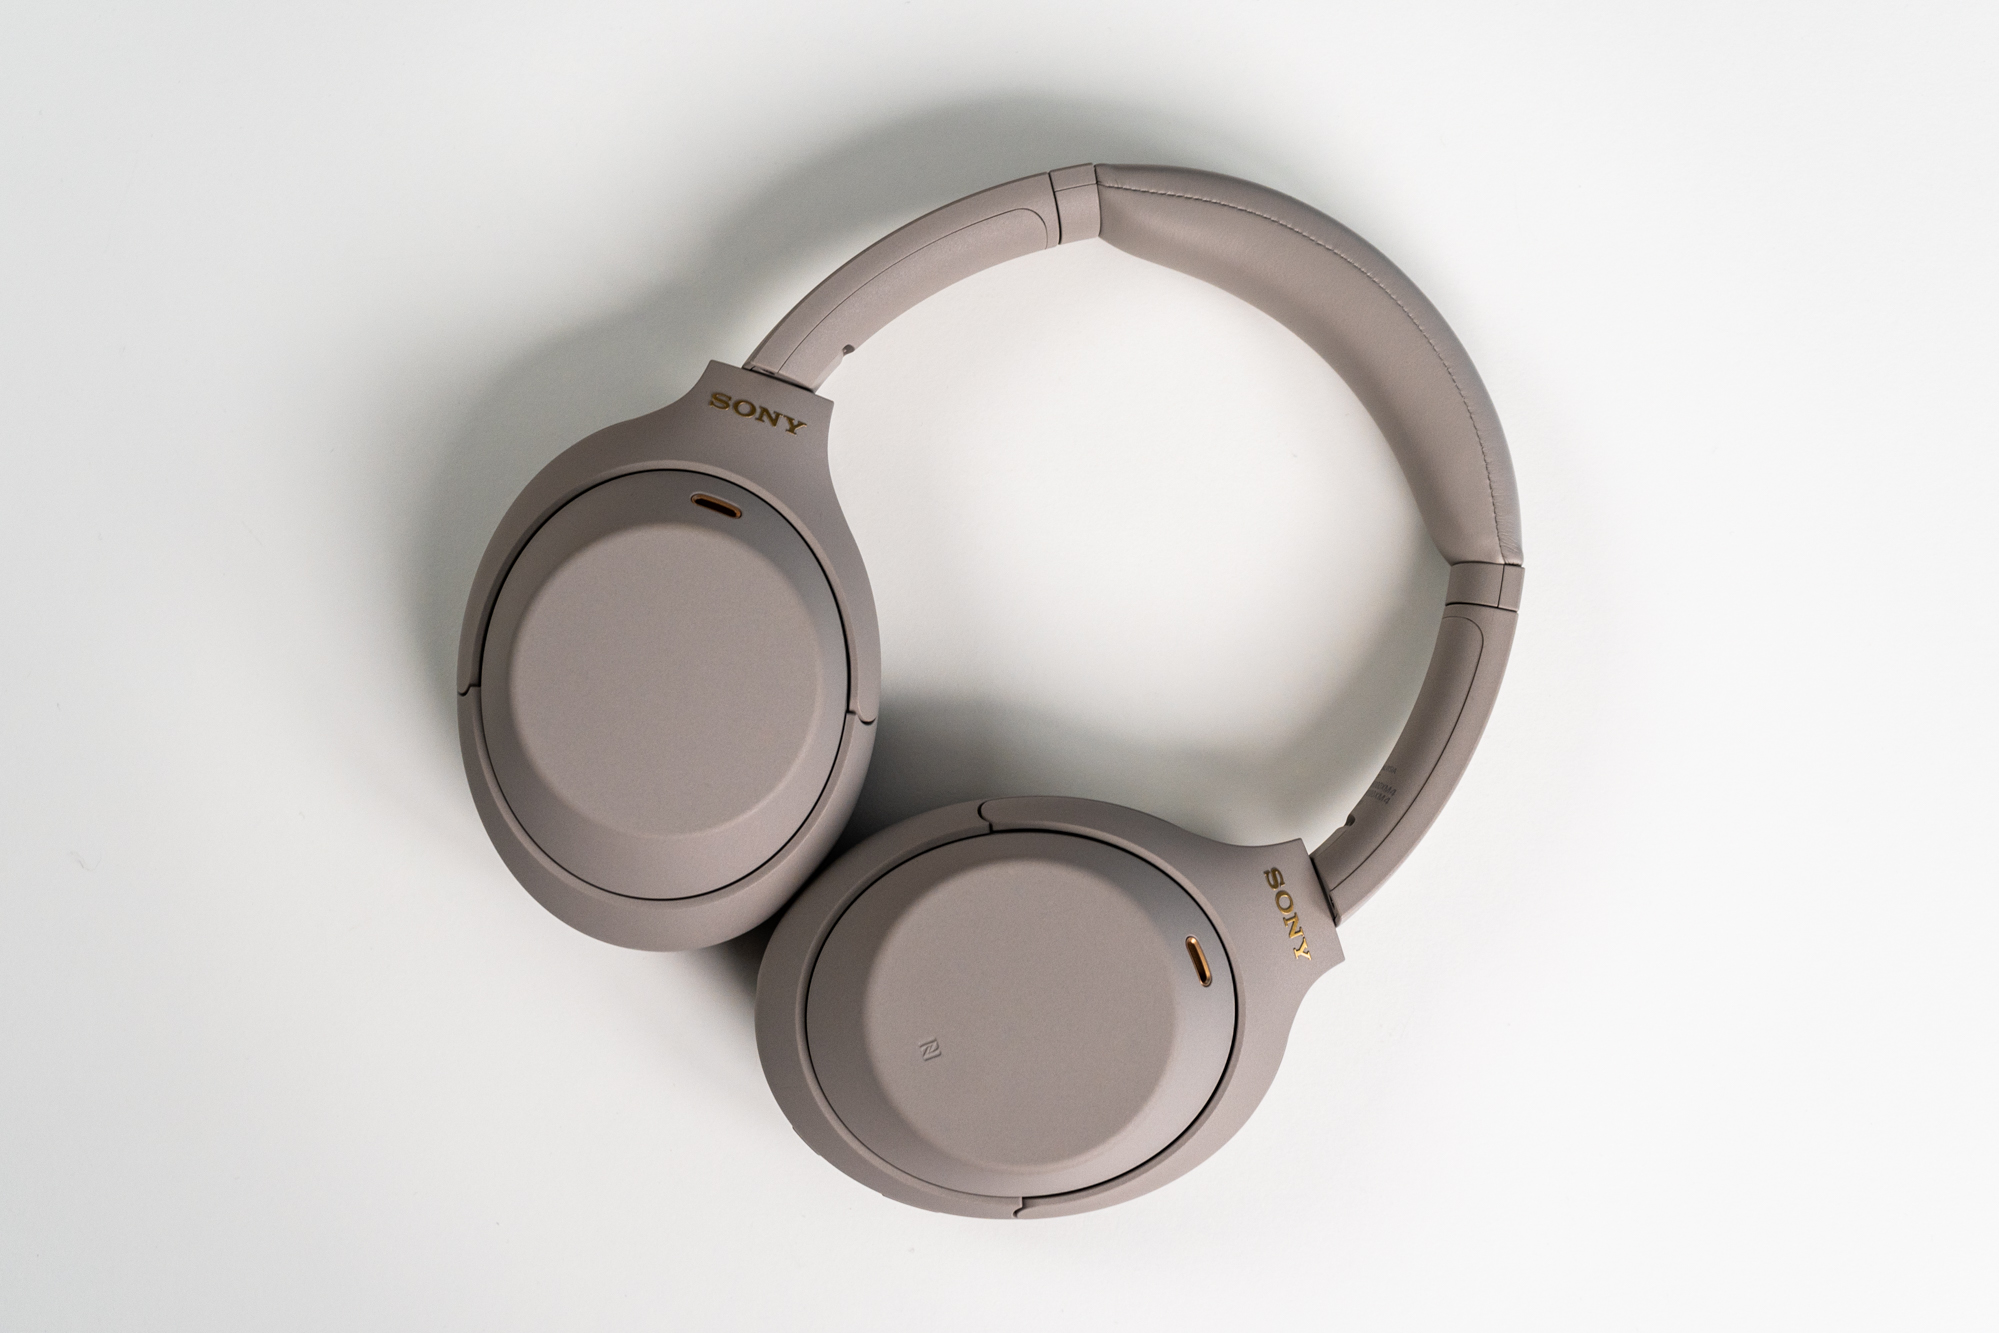 Sony WH-1000MX4 Headphones Down to Lowest-Ever Price | Digital Trends